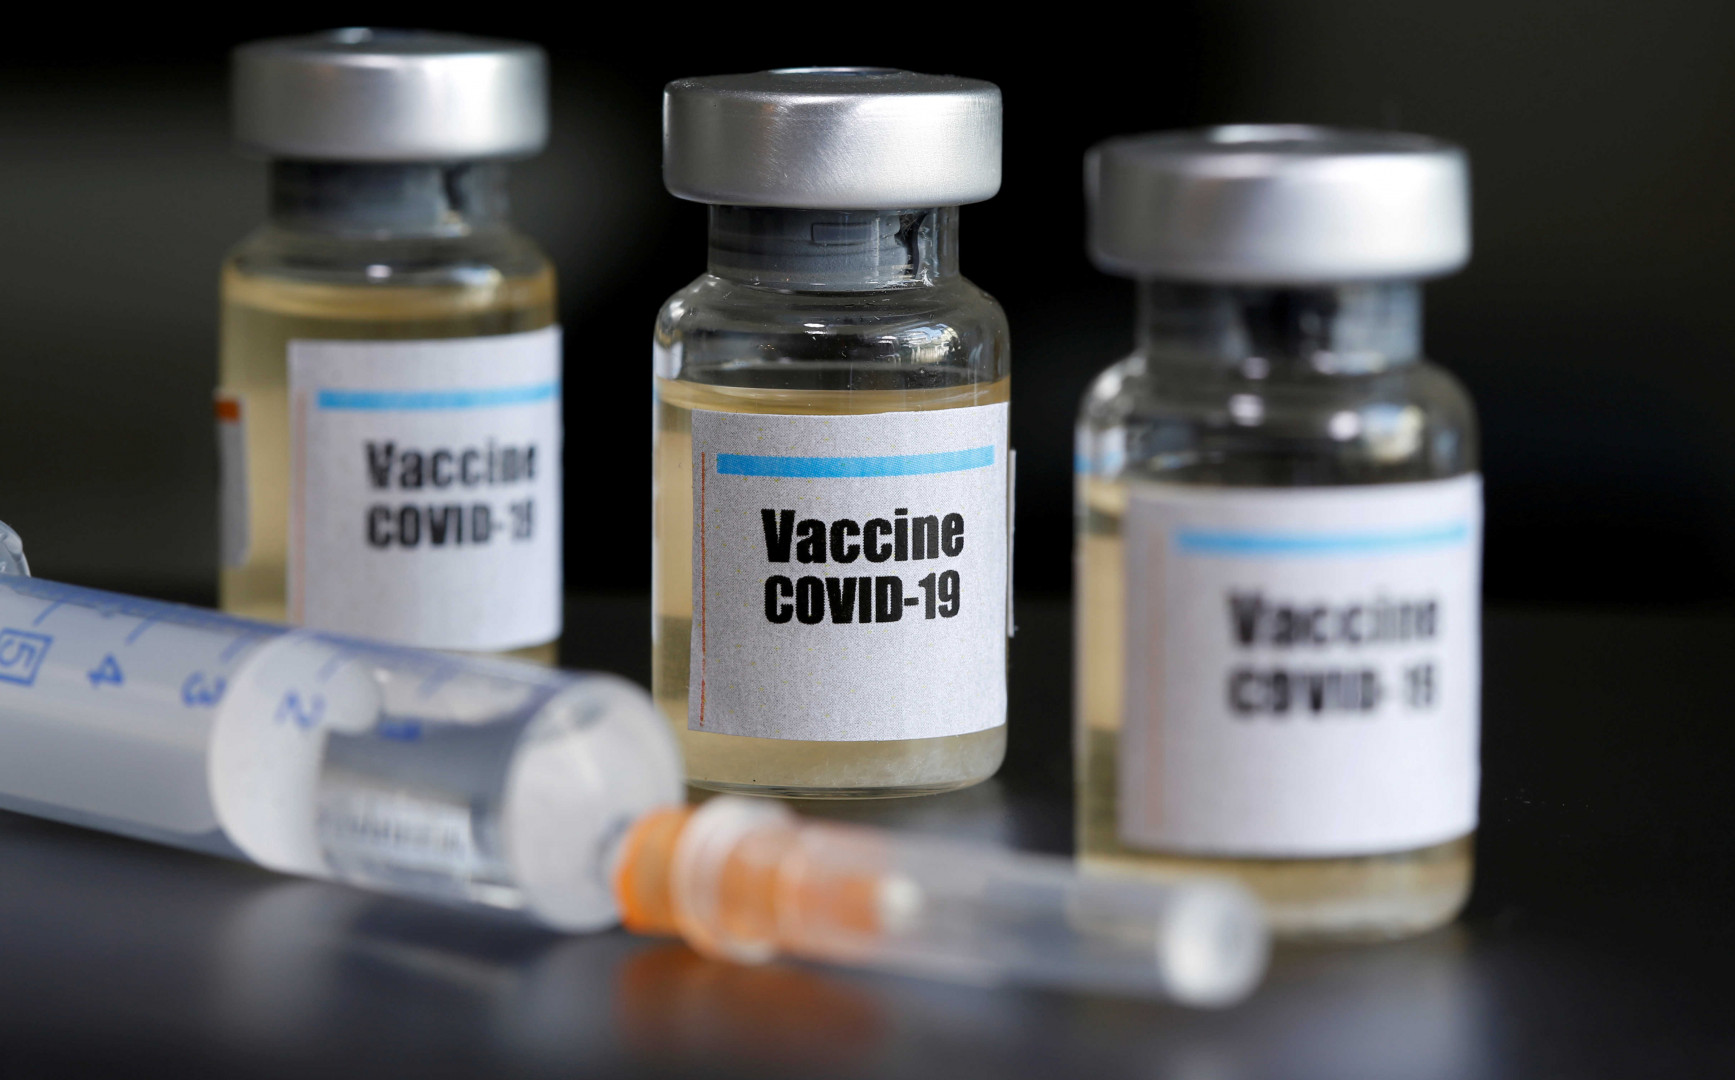 WHO to Russia: “strict” mechanisms before licensing the Covid-19 vaccine